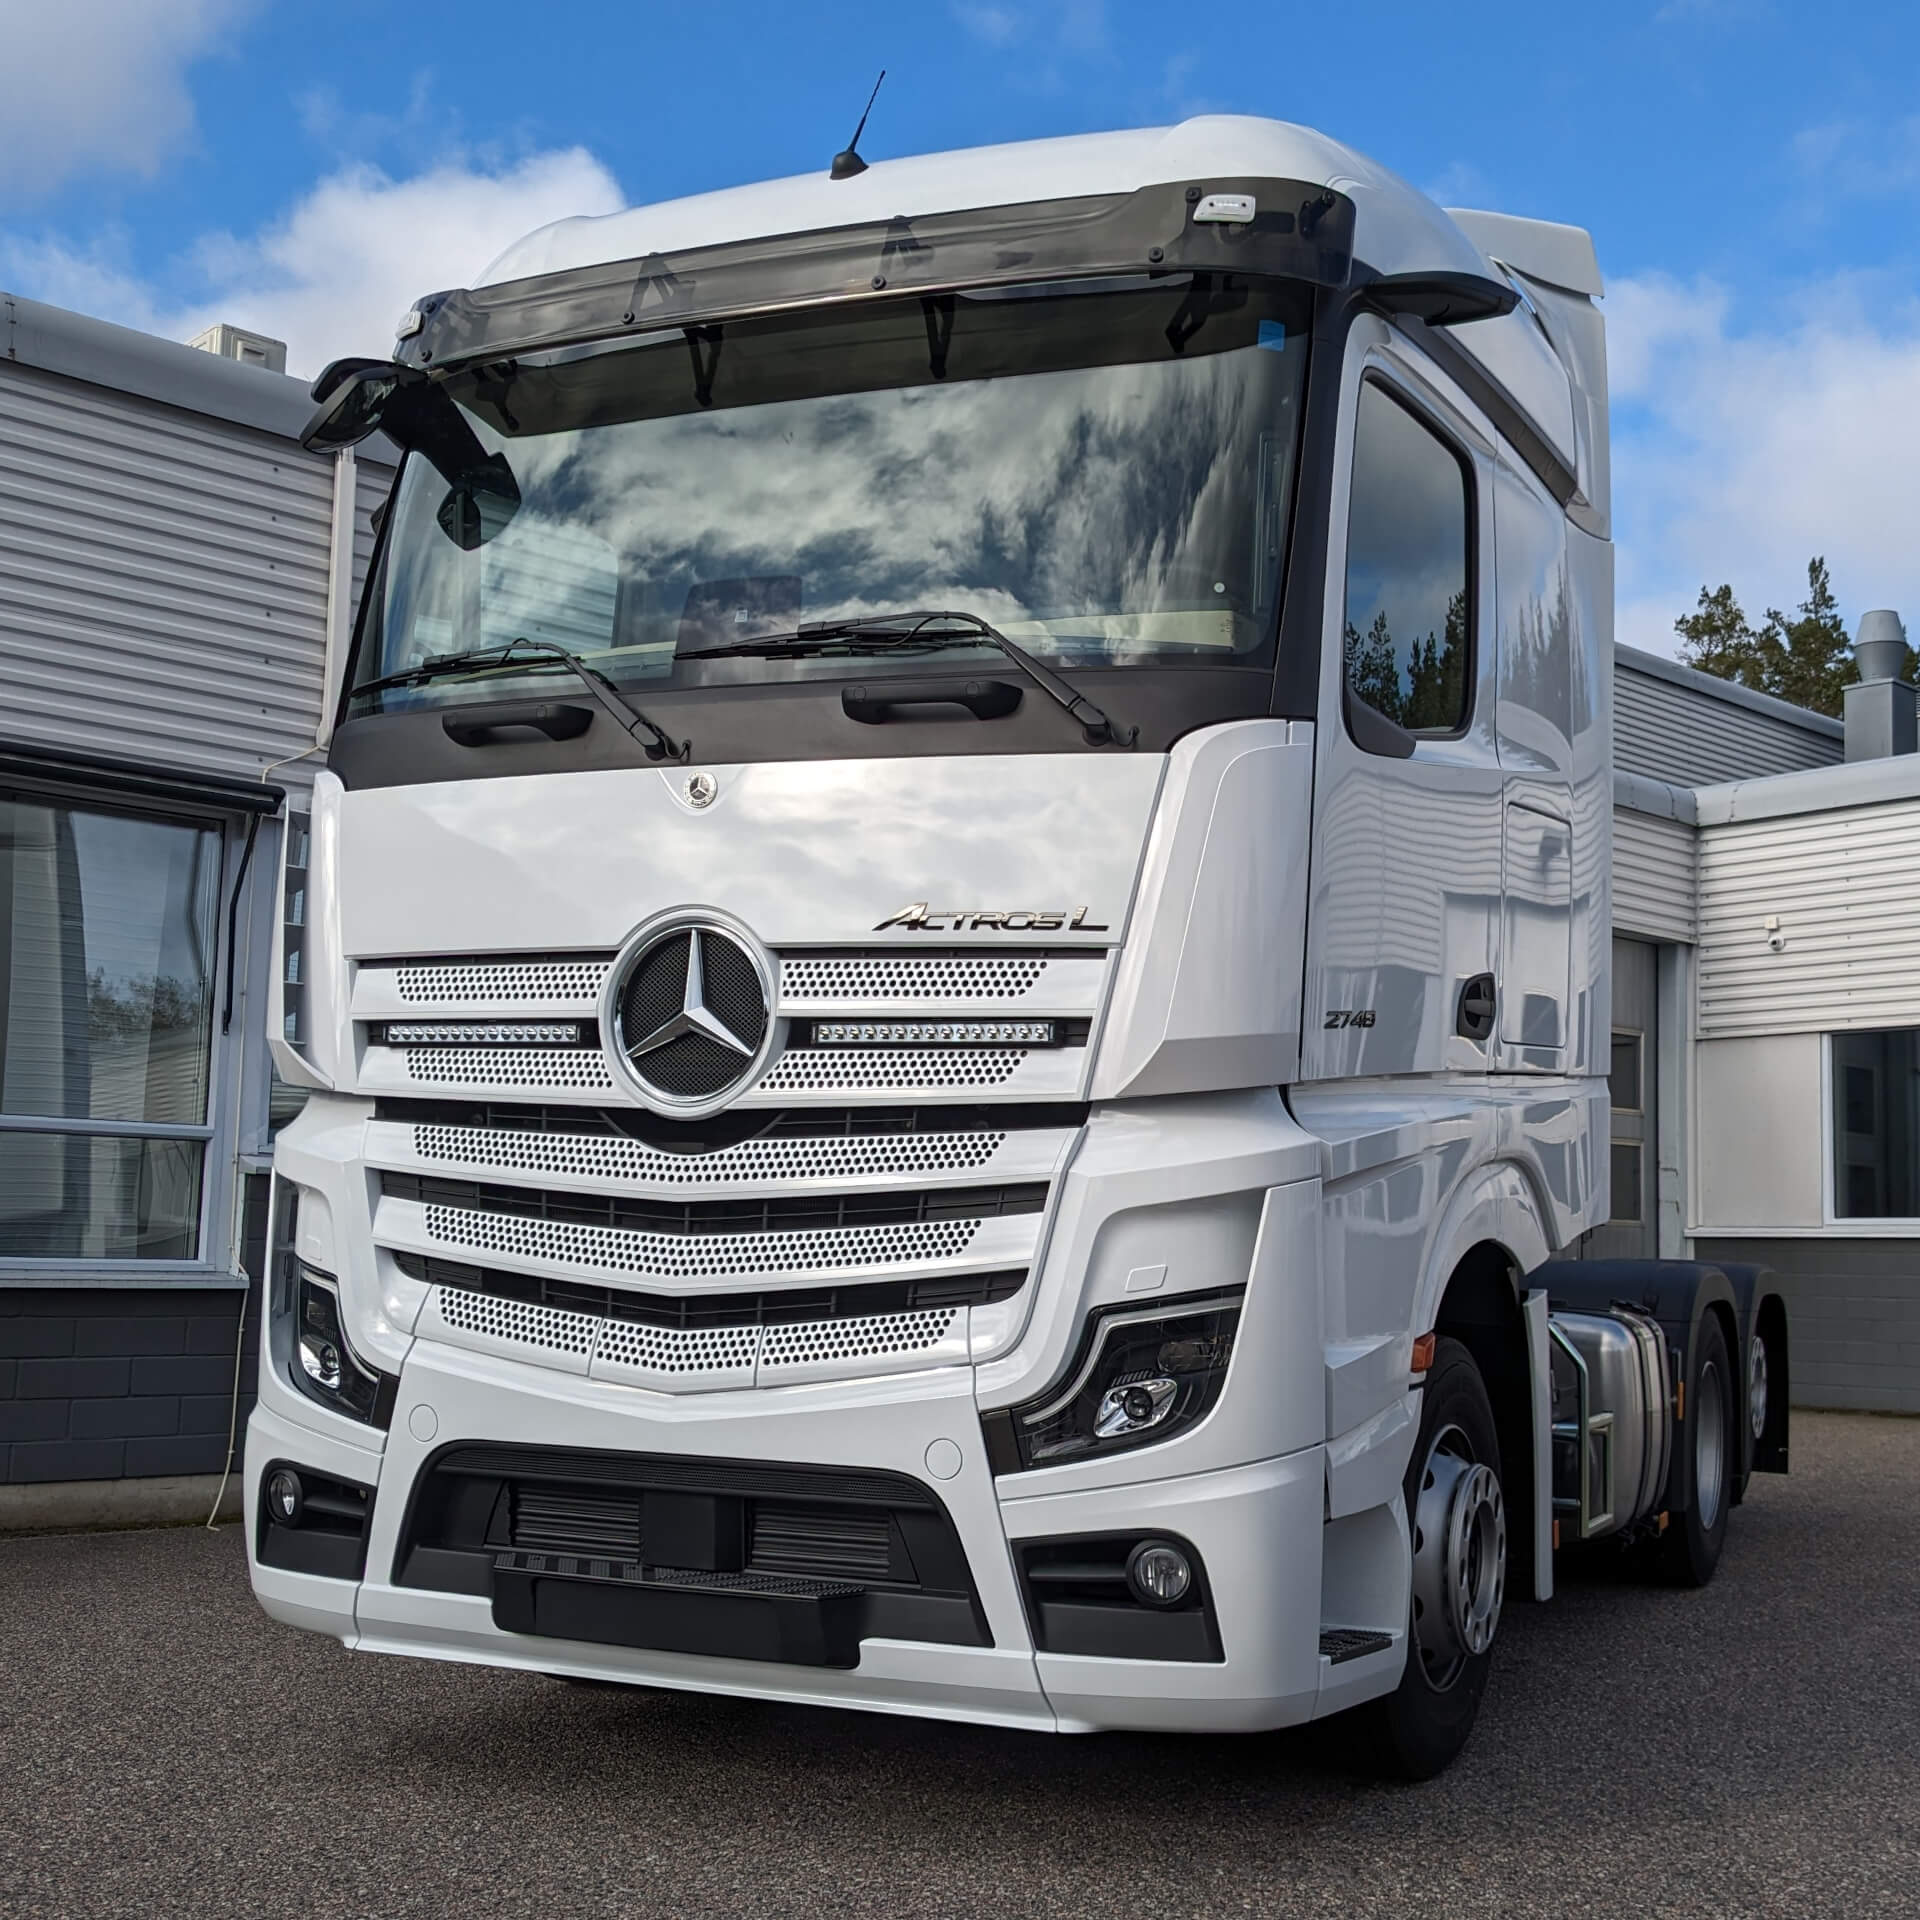 Mercedes-Benz Artego with two perfectly integrated 21" Vision X XPL Halo LED light bars in the grille. 👌🚛 Artego will also get a sunvisor kit, with a selection of LED light bars. Soon available as vehicle specific kits @ visionxeurope.com!